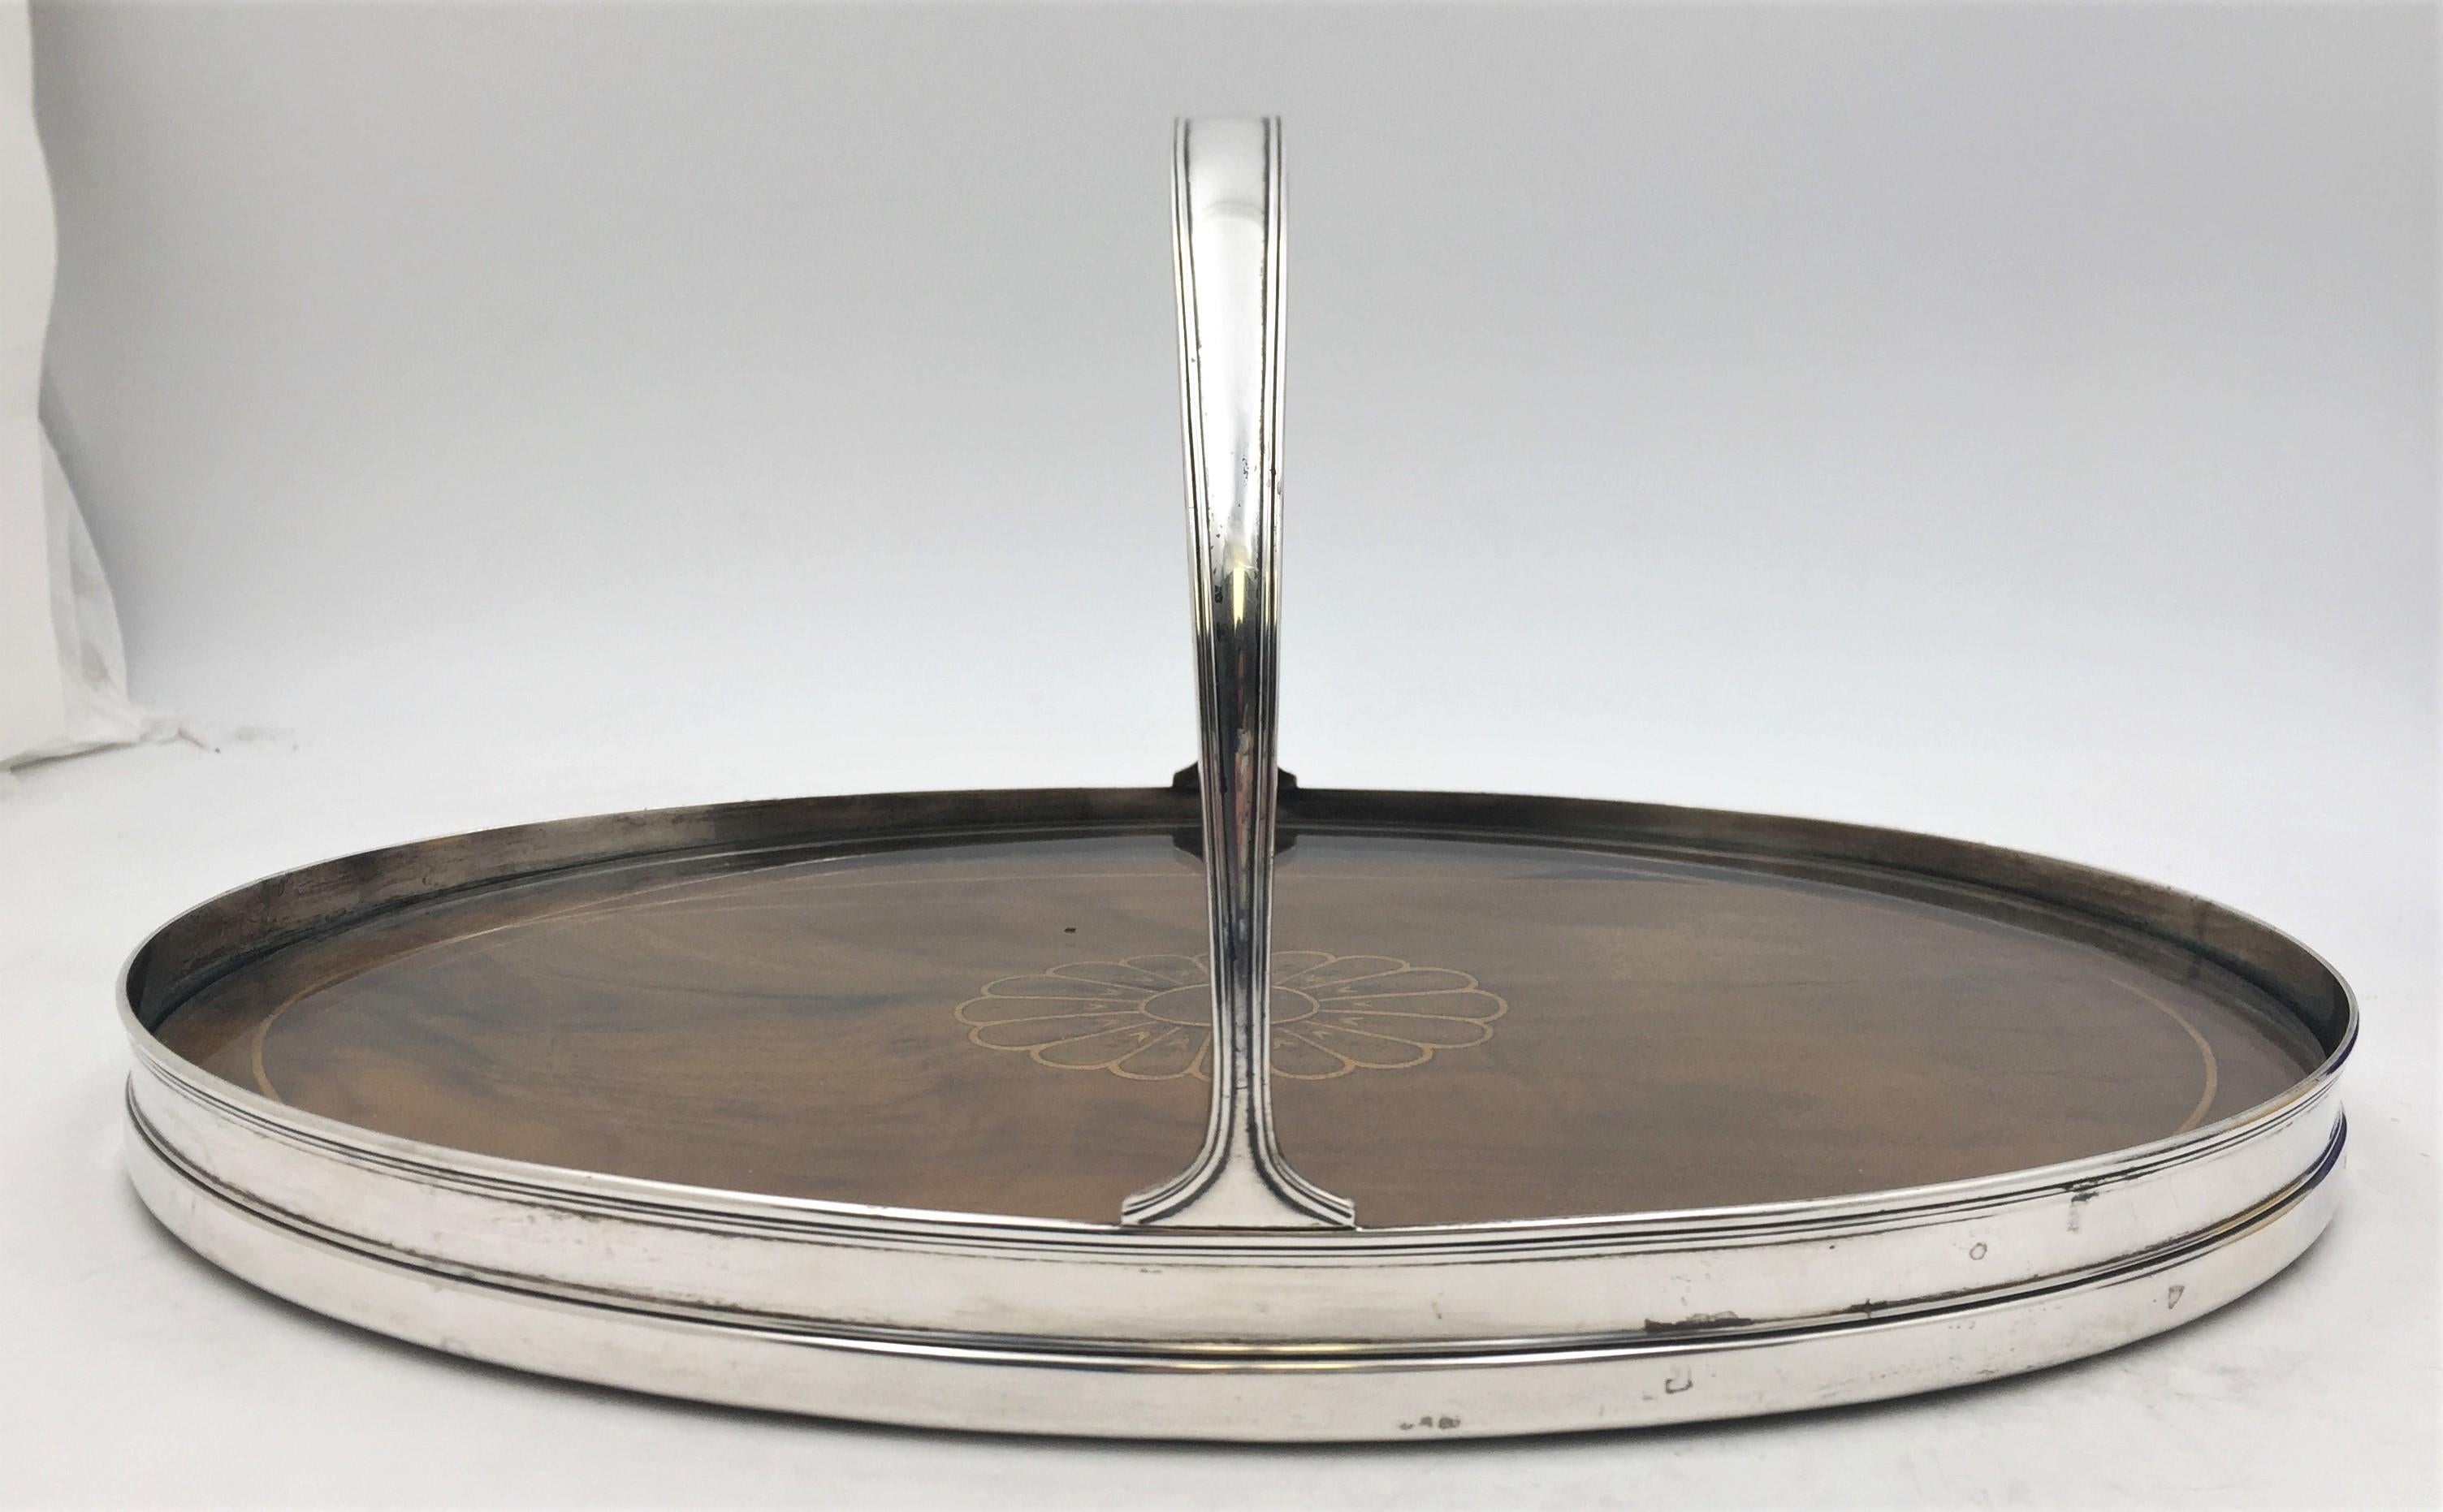 Tiffany & Co. sterling silver and two-tone wood bar tray in pattern 18852 from 1915 and in Art Deco style with a beautiful flower motif at the center and with a geometrically inspired design. It measures 13 7/8'' in length by 9 1/8'' in width by 6